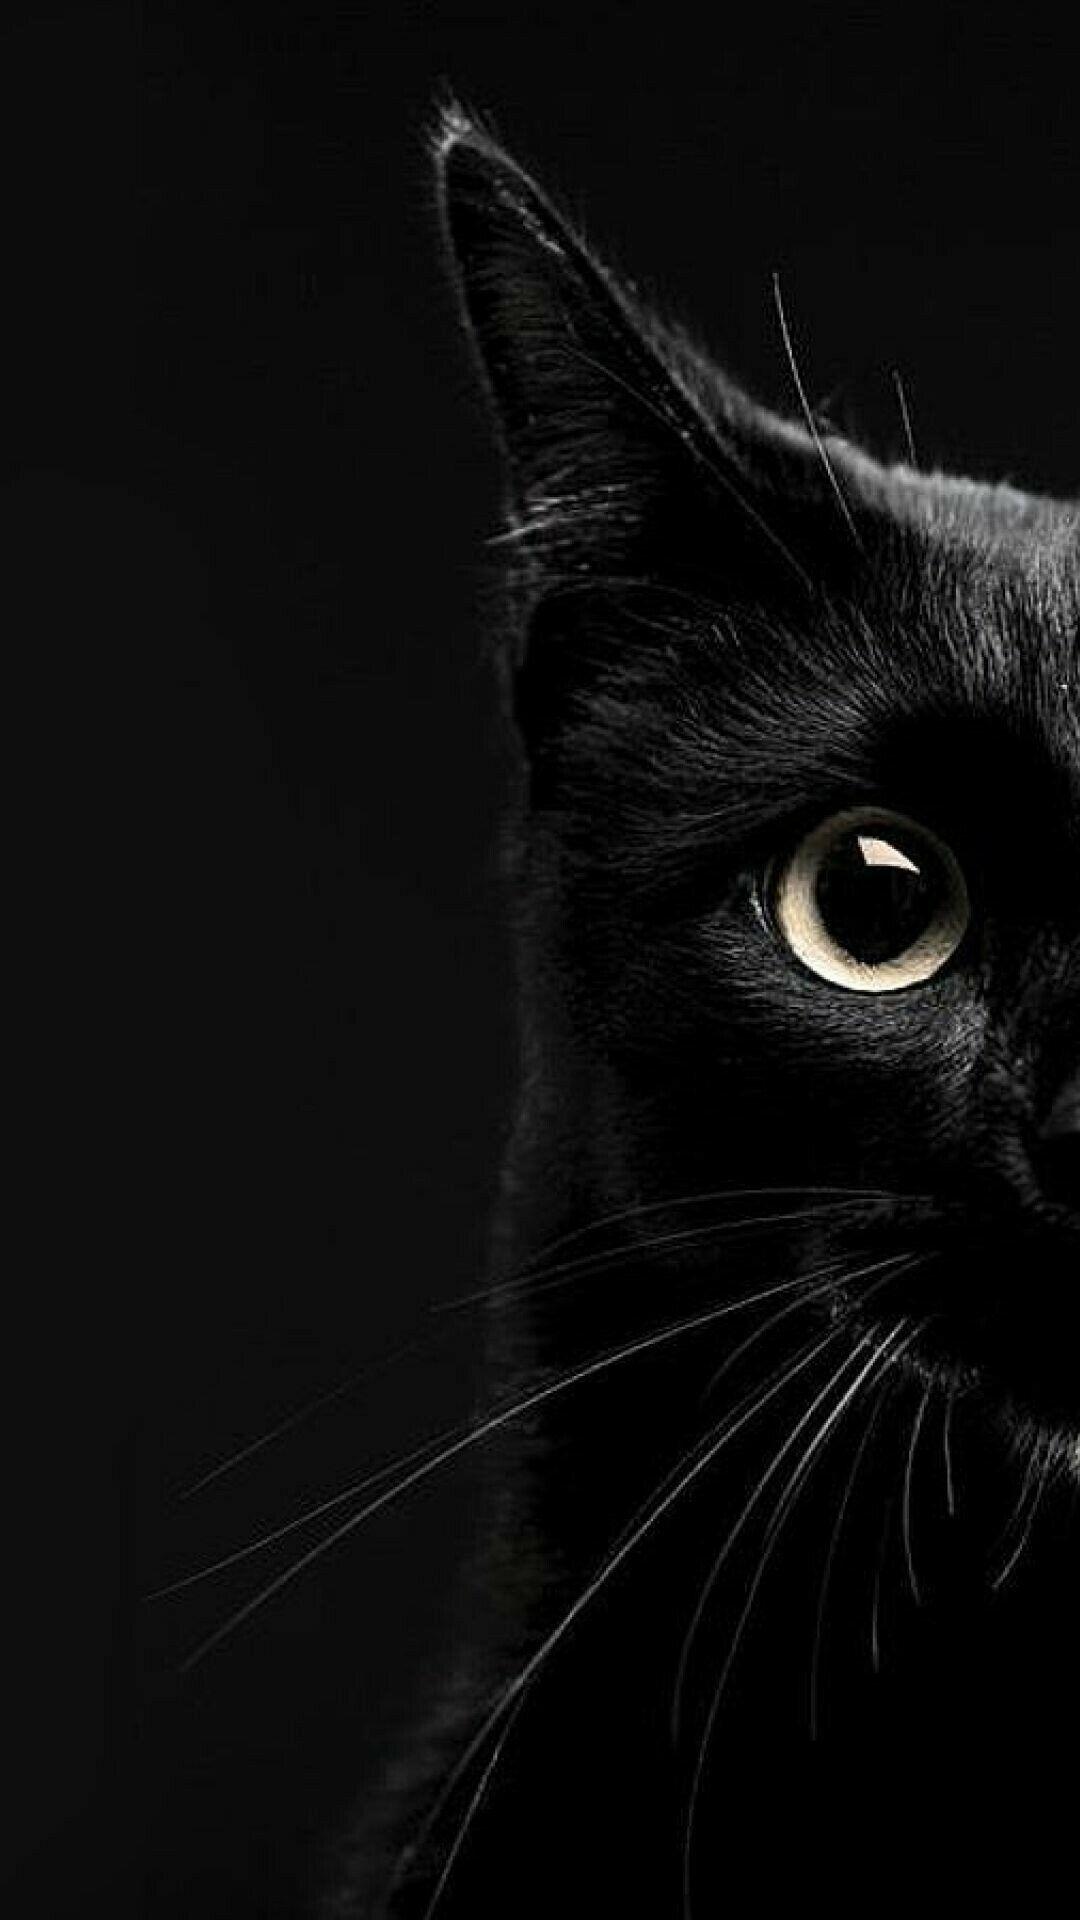 20 Greatest wallpaper aesthetic black cat You Can Download It Free Of